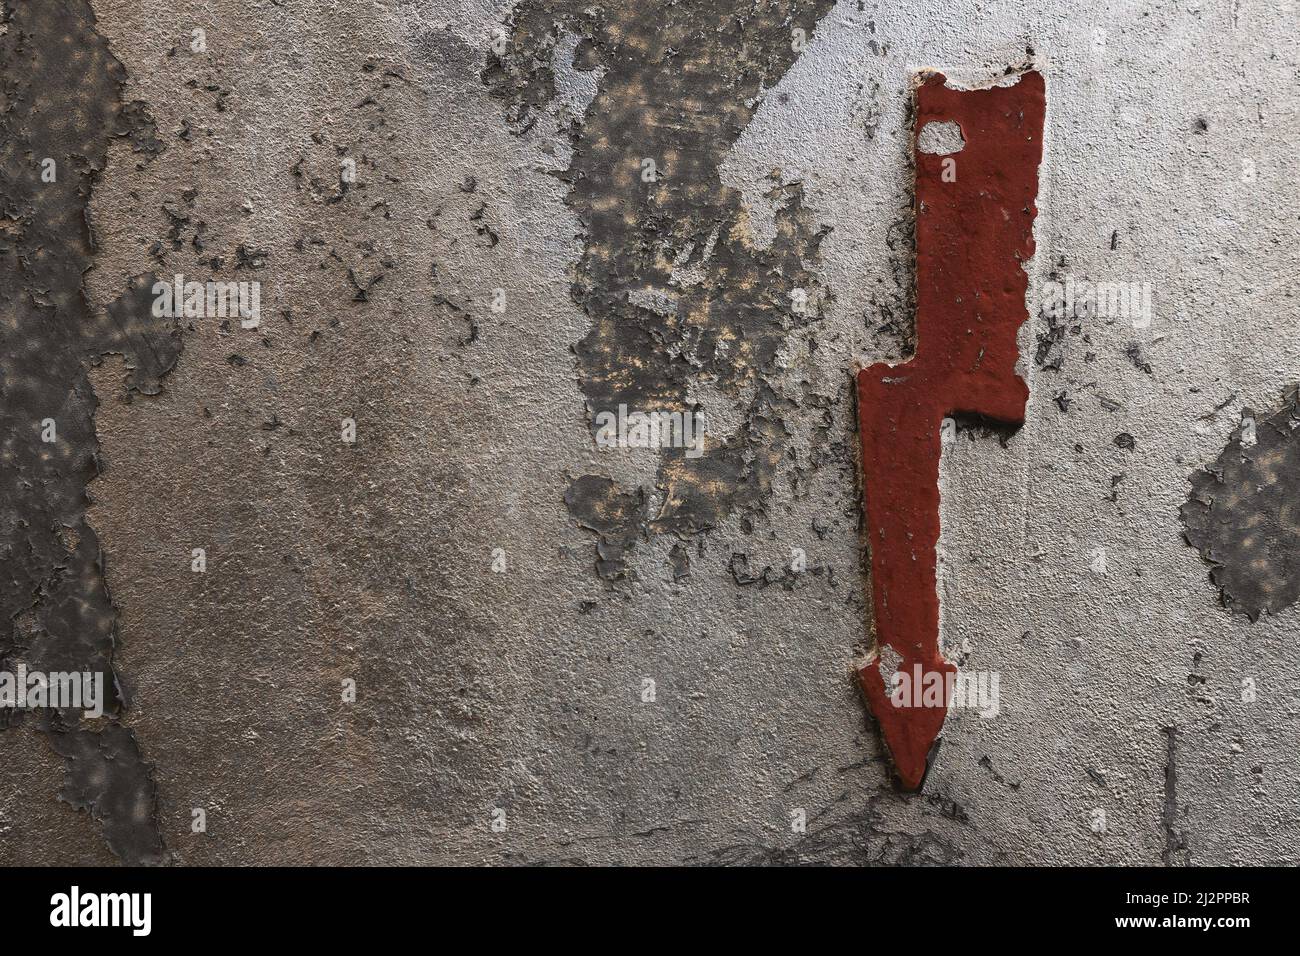 Old electricity sign on a metal surface, close-up view. Stock Photo